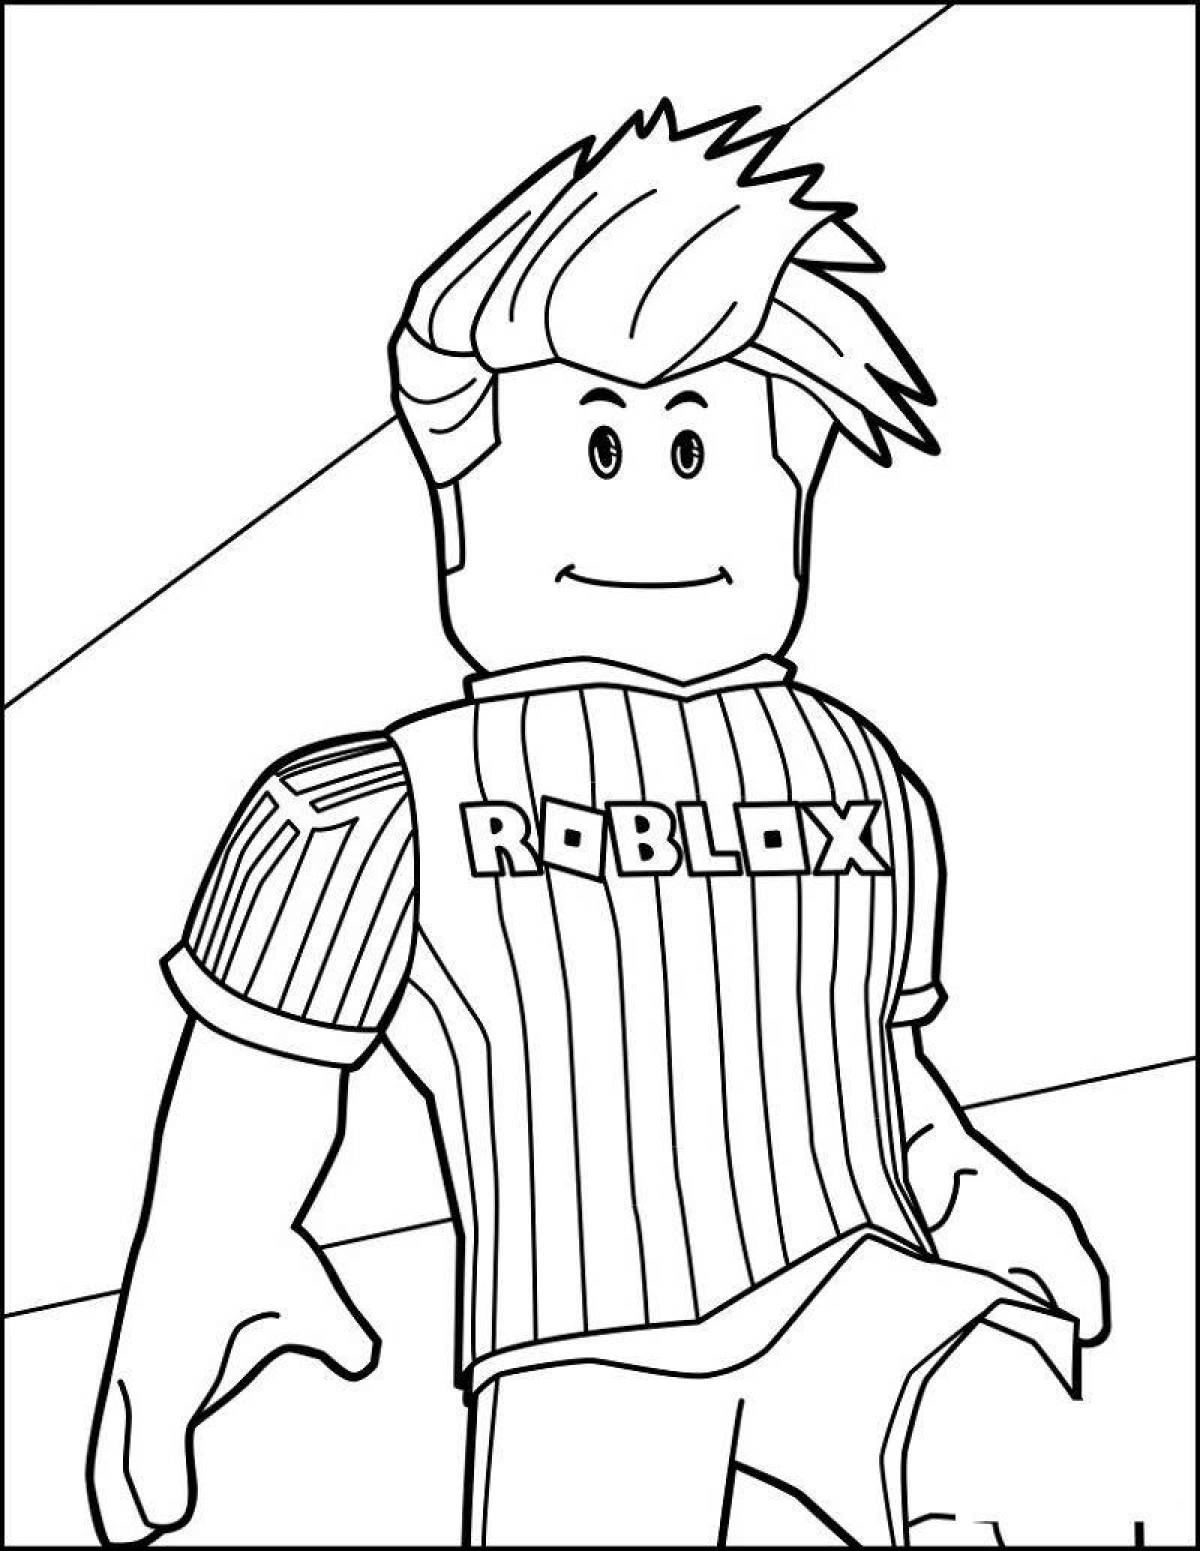 Coloring playful robloh